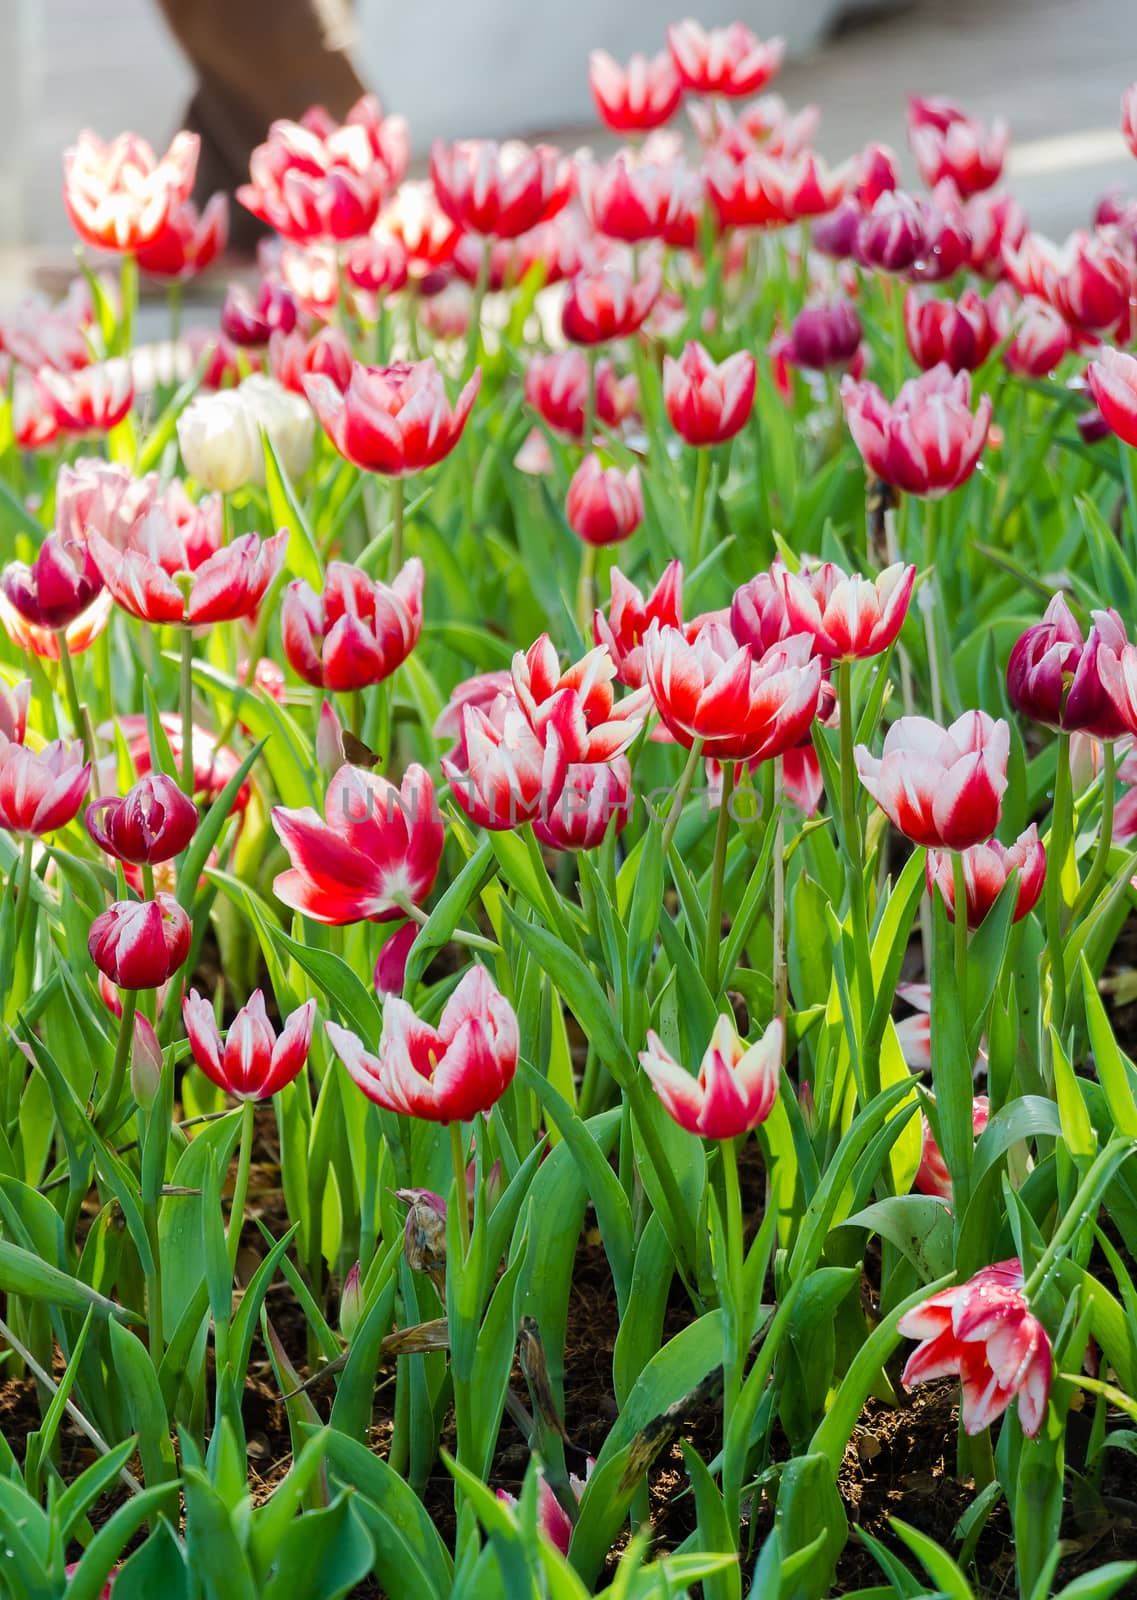 Field of Tulips in various colors by chingraph